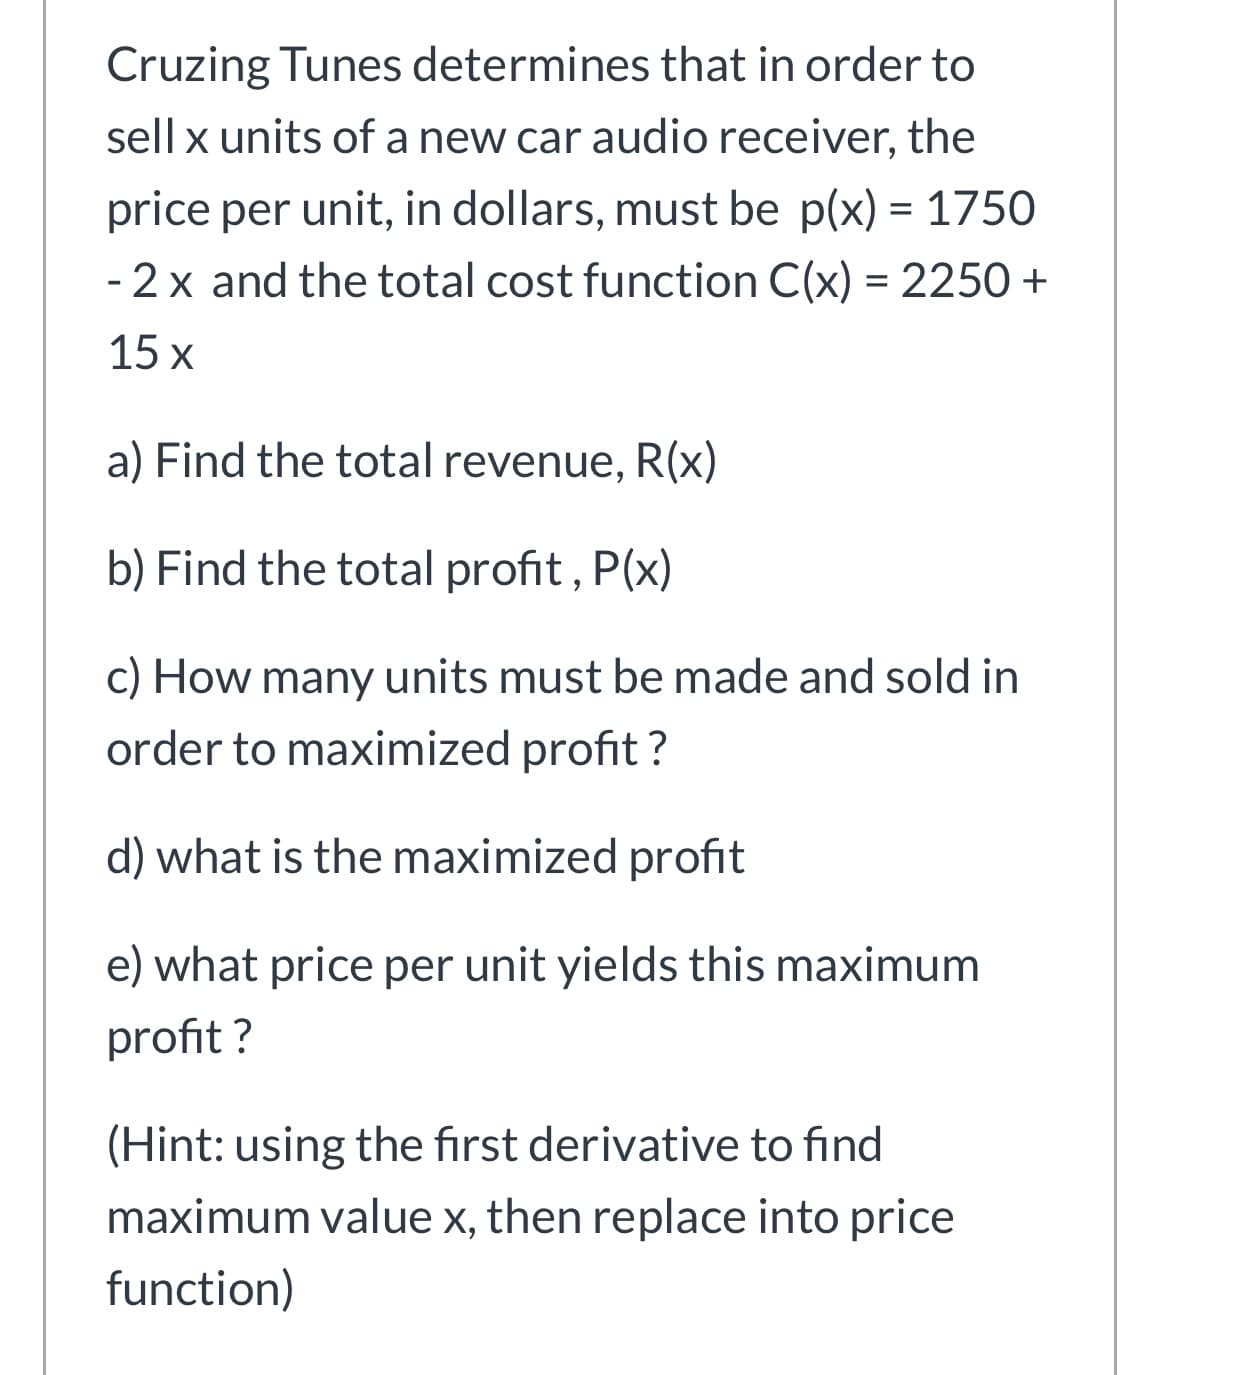 Cruzing Tunes determines that in order to
sell x units of a new car audio receiver, the
price per unit, in dollars, must be p(x) = 1750
- 2 x and the total cost function C(x) = 2250 +
15 x
a) Find the total revenue, R(x)
b) Find the total profit, P(x)
c) How many units must be made and sold in
order to maximized profit ?
d) what is the maximized profit
